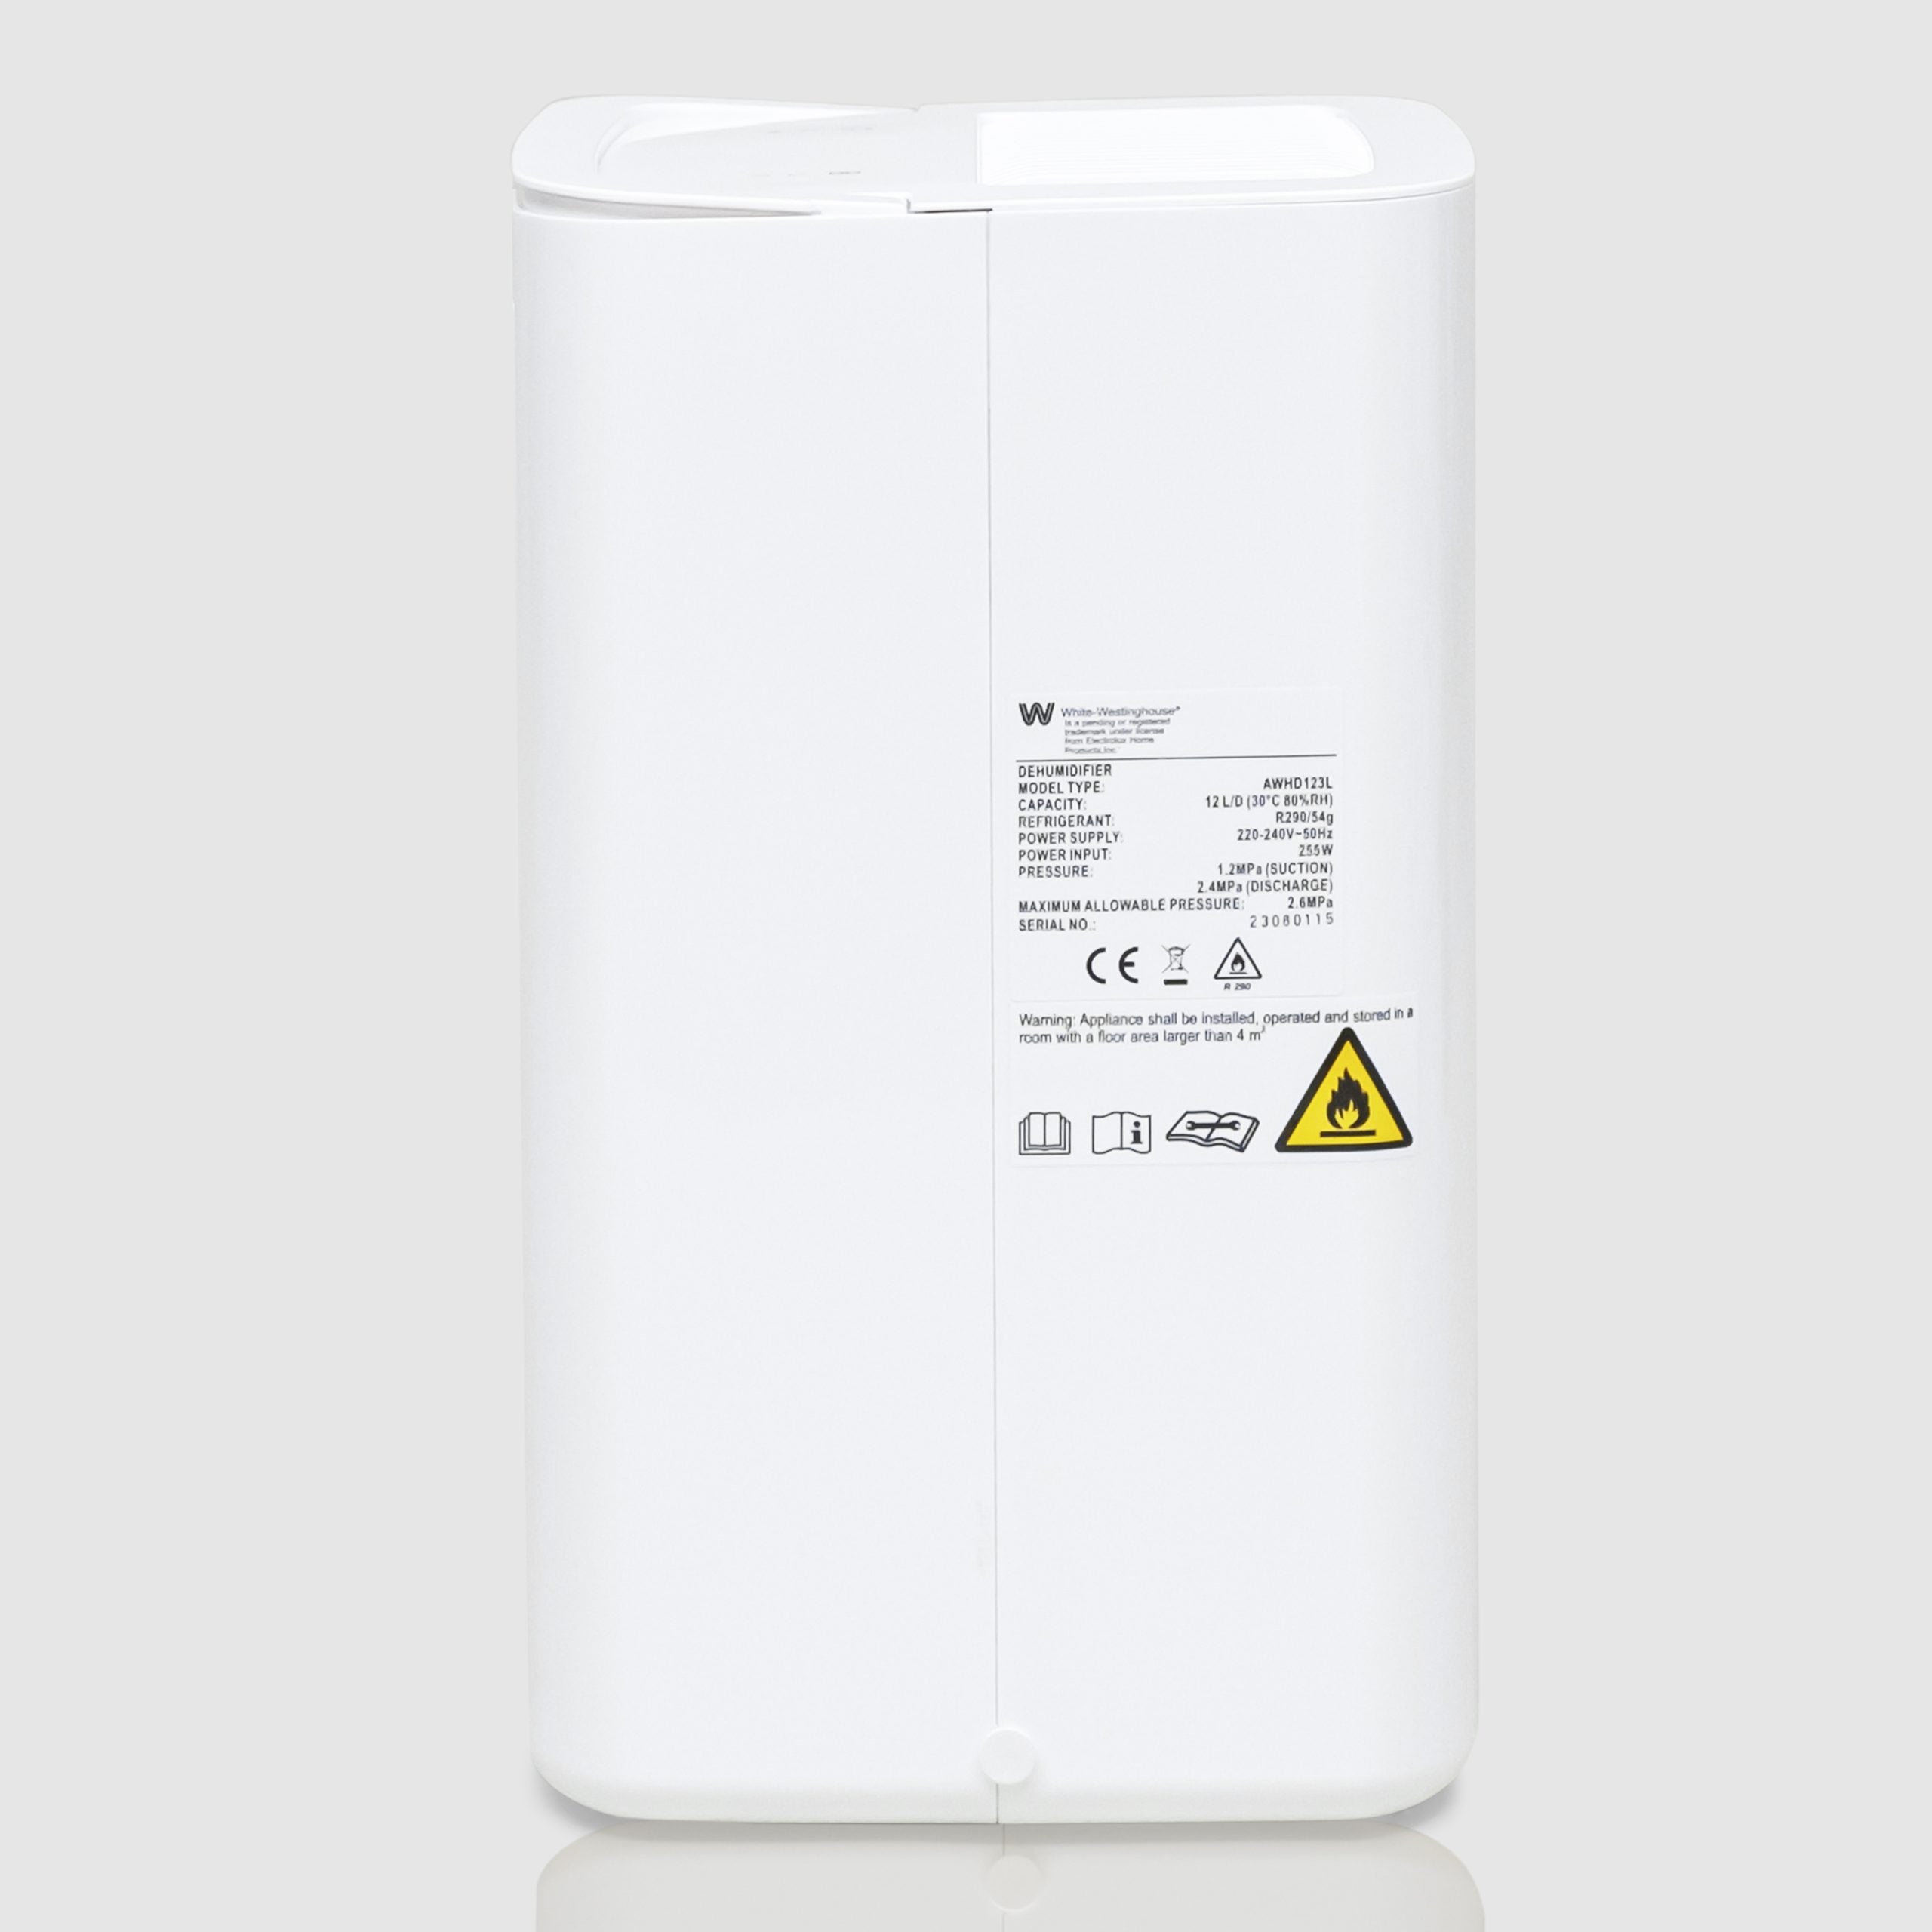 Rear view of the White Westinghouse Dehumidifier AWHD123L, showcasing the sleek white design with safety labels and certification marks. The unit is suitable for maintaining optimal humidity levels in residential and commercial spaces.